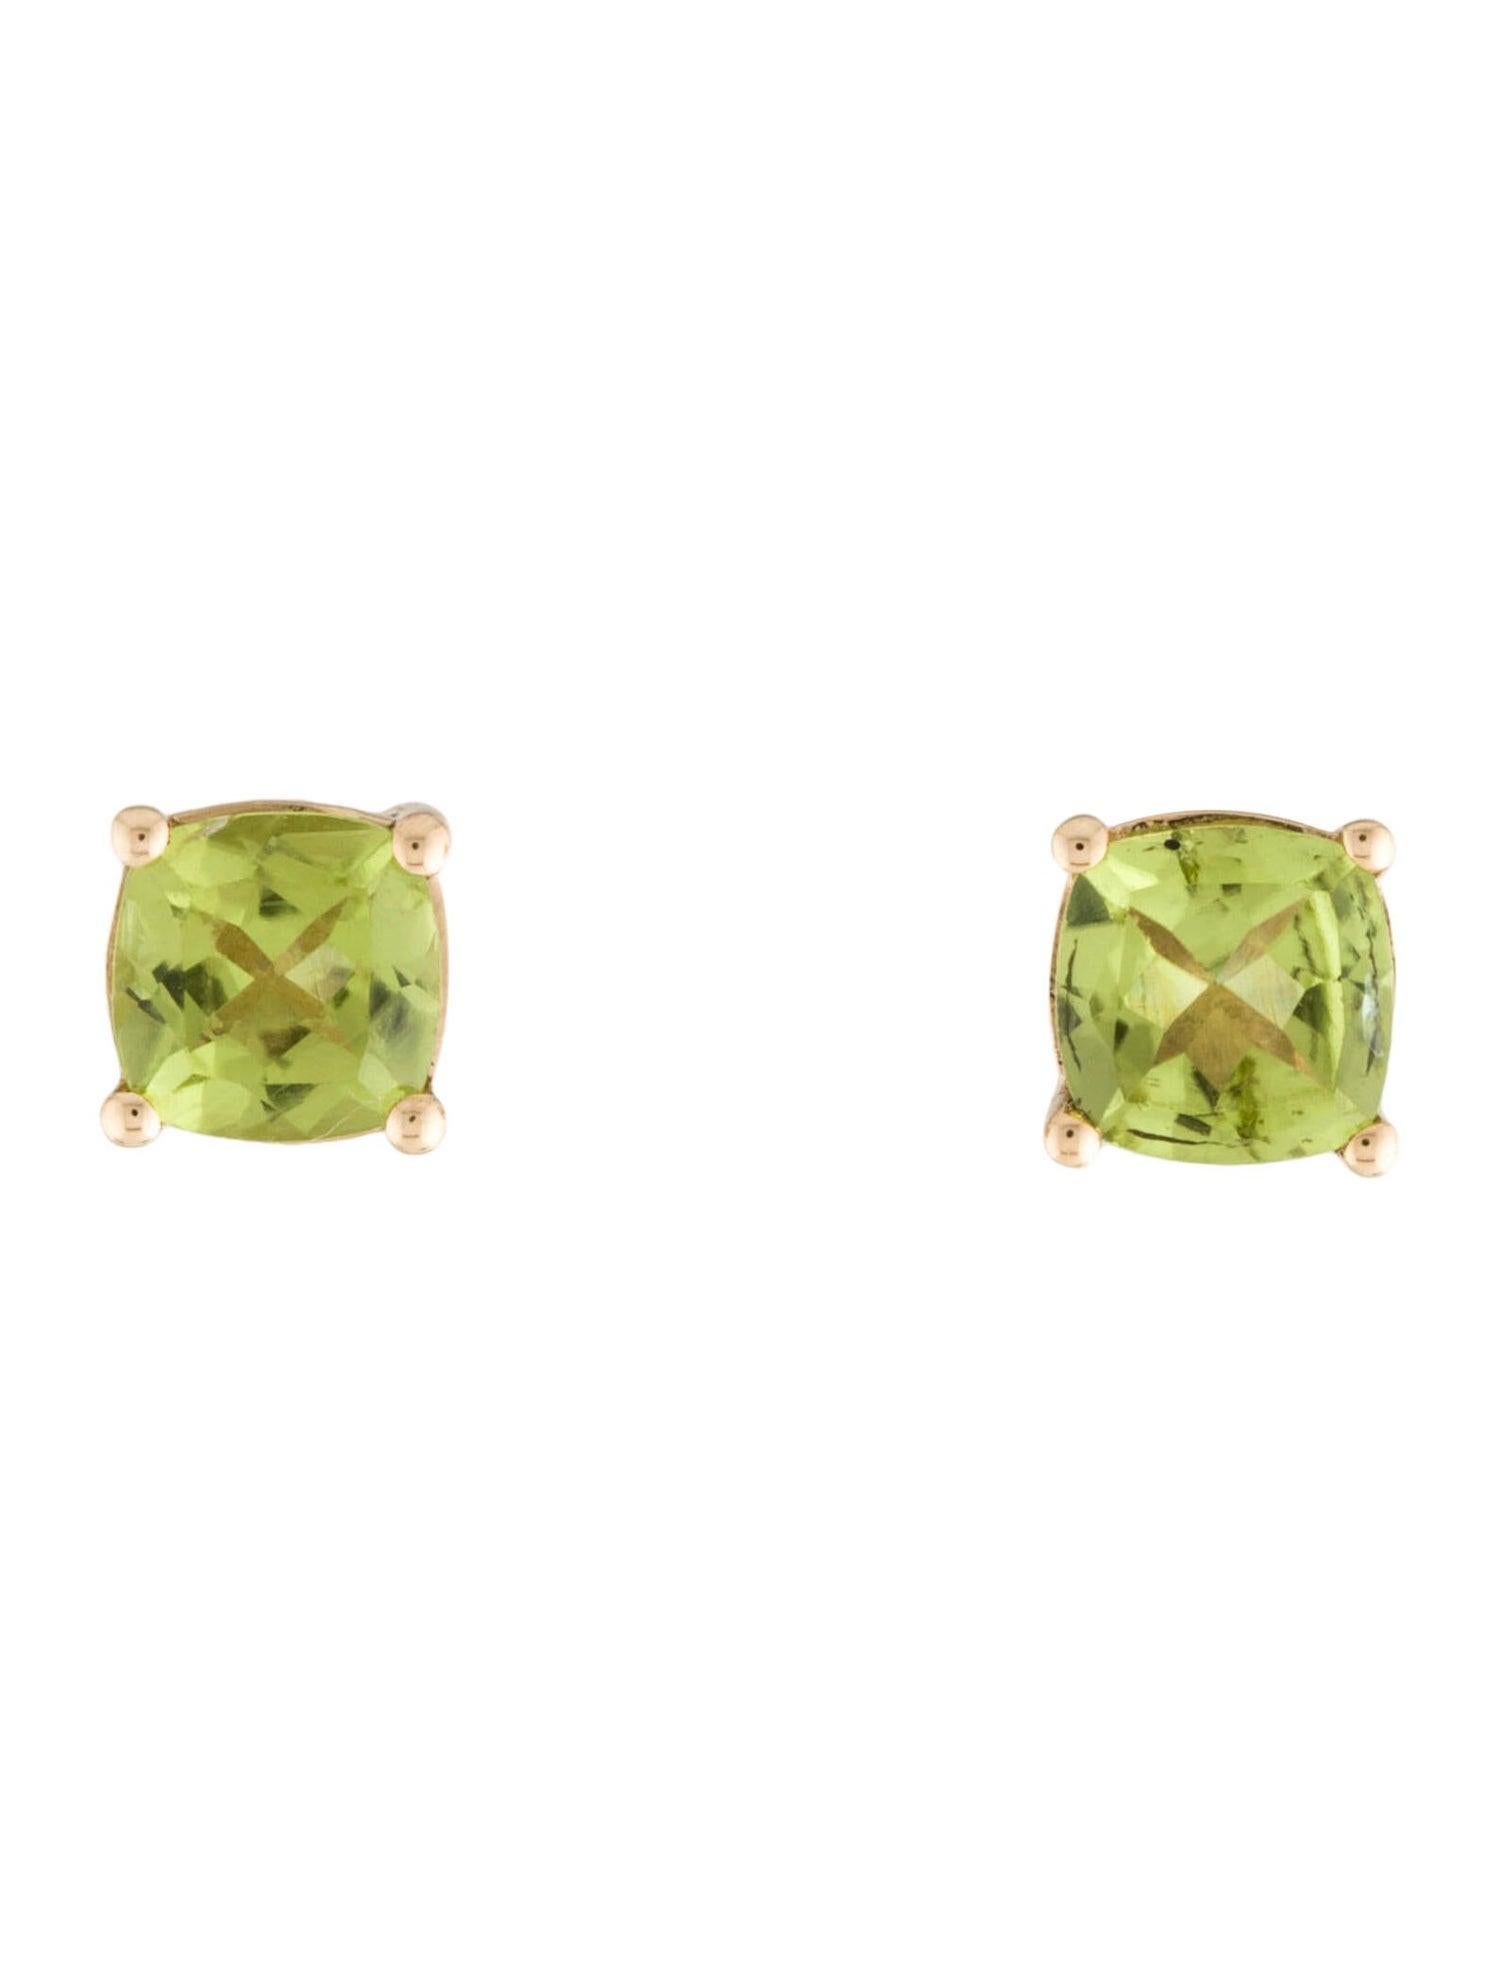 Chic 14K 2.02ctw Peridot Stud Earrings - Elegant Gemstone Jewelry Piece In New Condition For Sale In Holtsville, NY